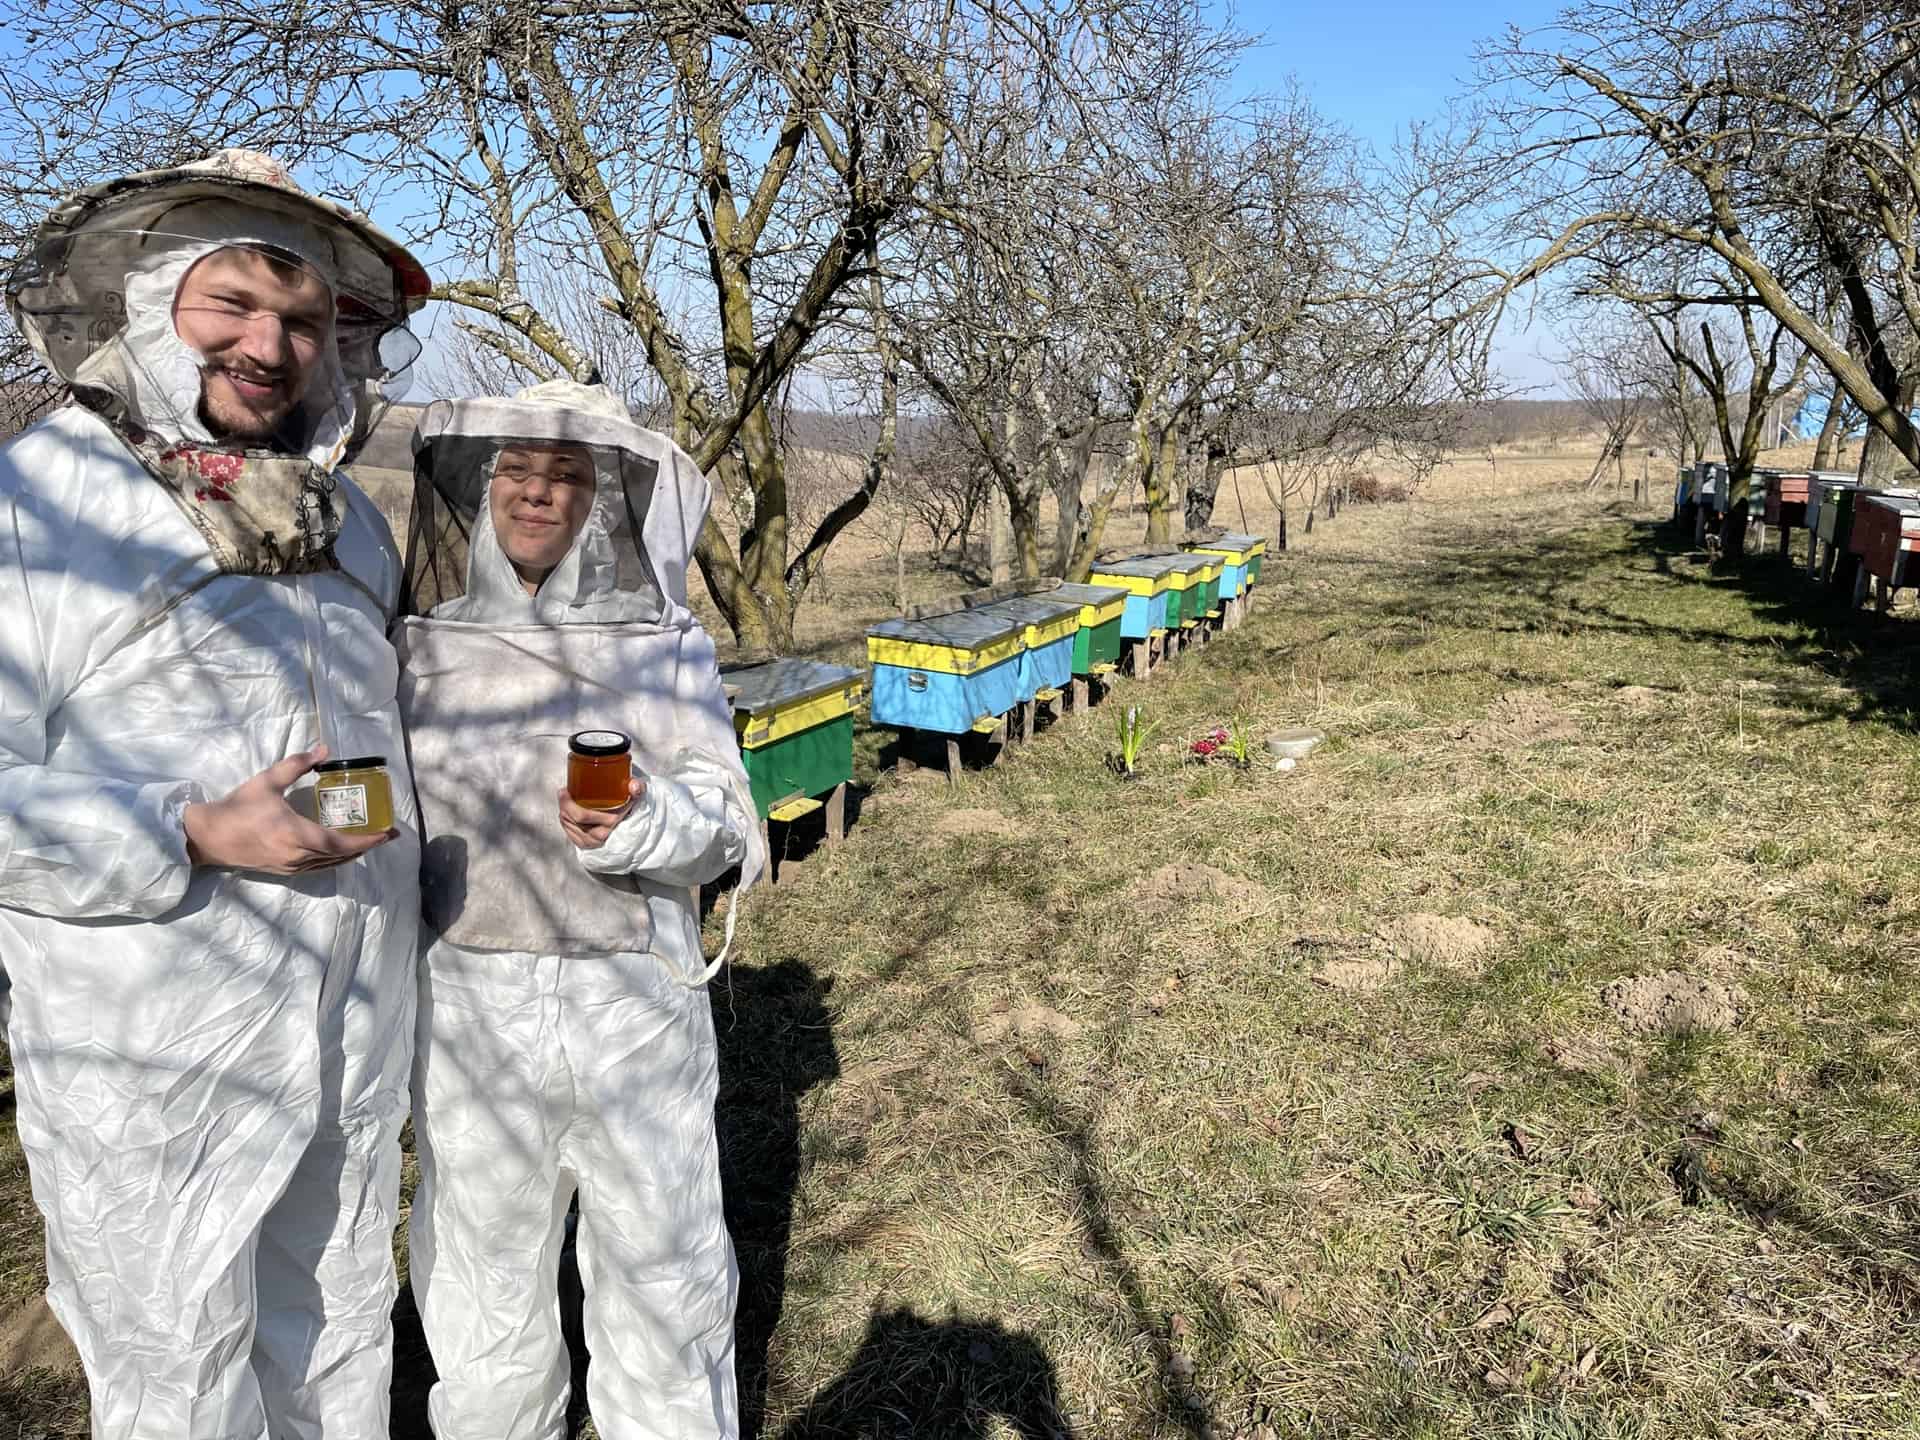 What Personal Protective Clothing Do Beekeepers Need?